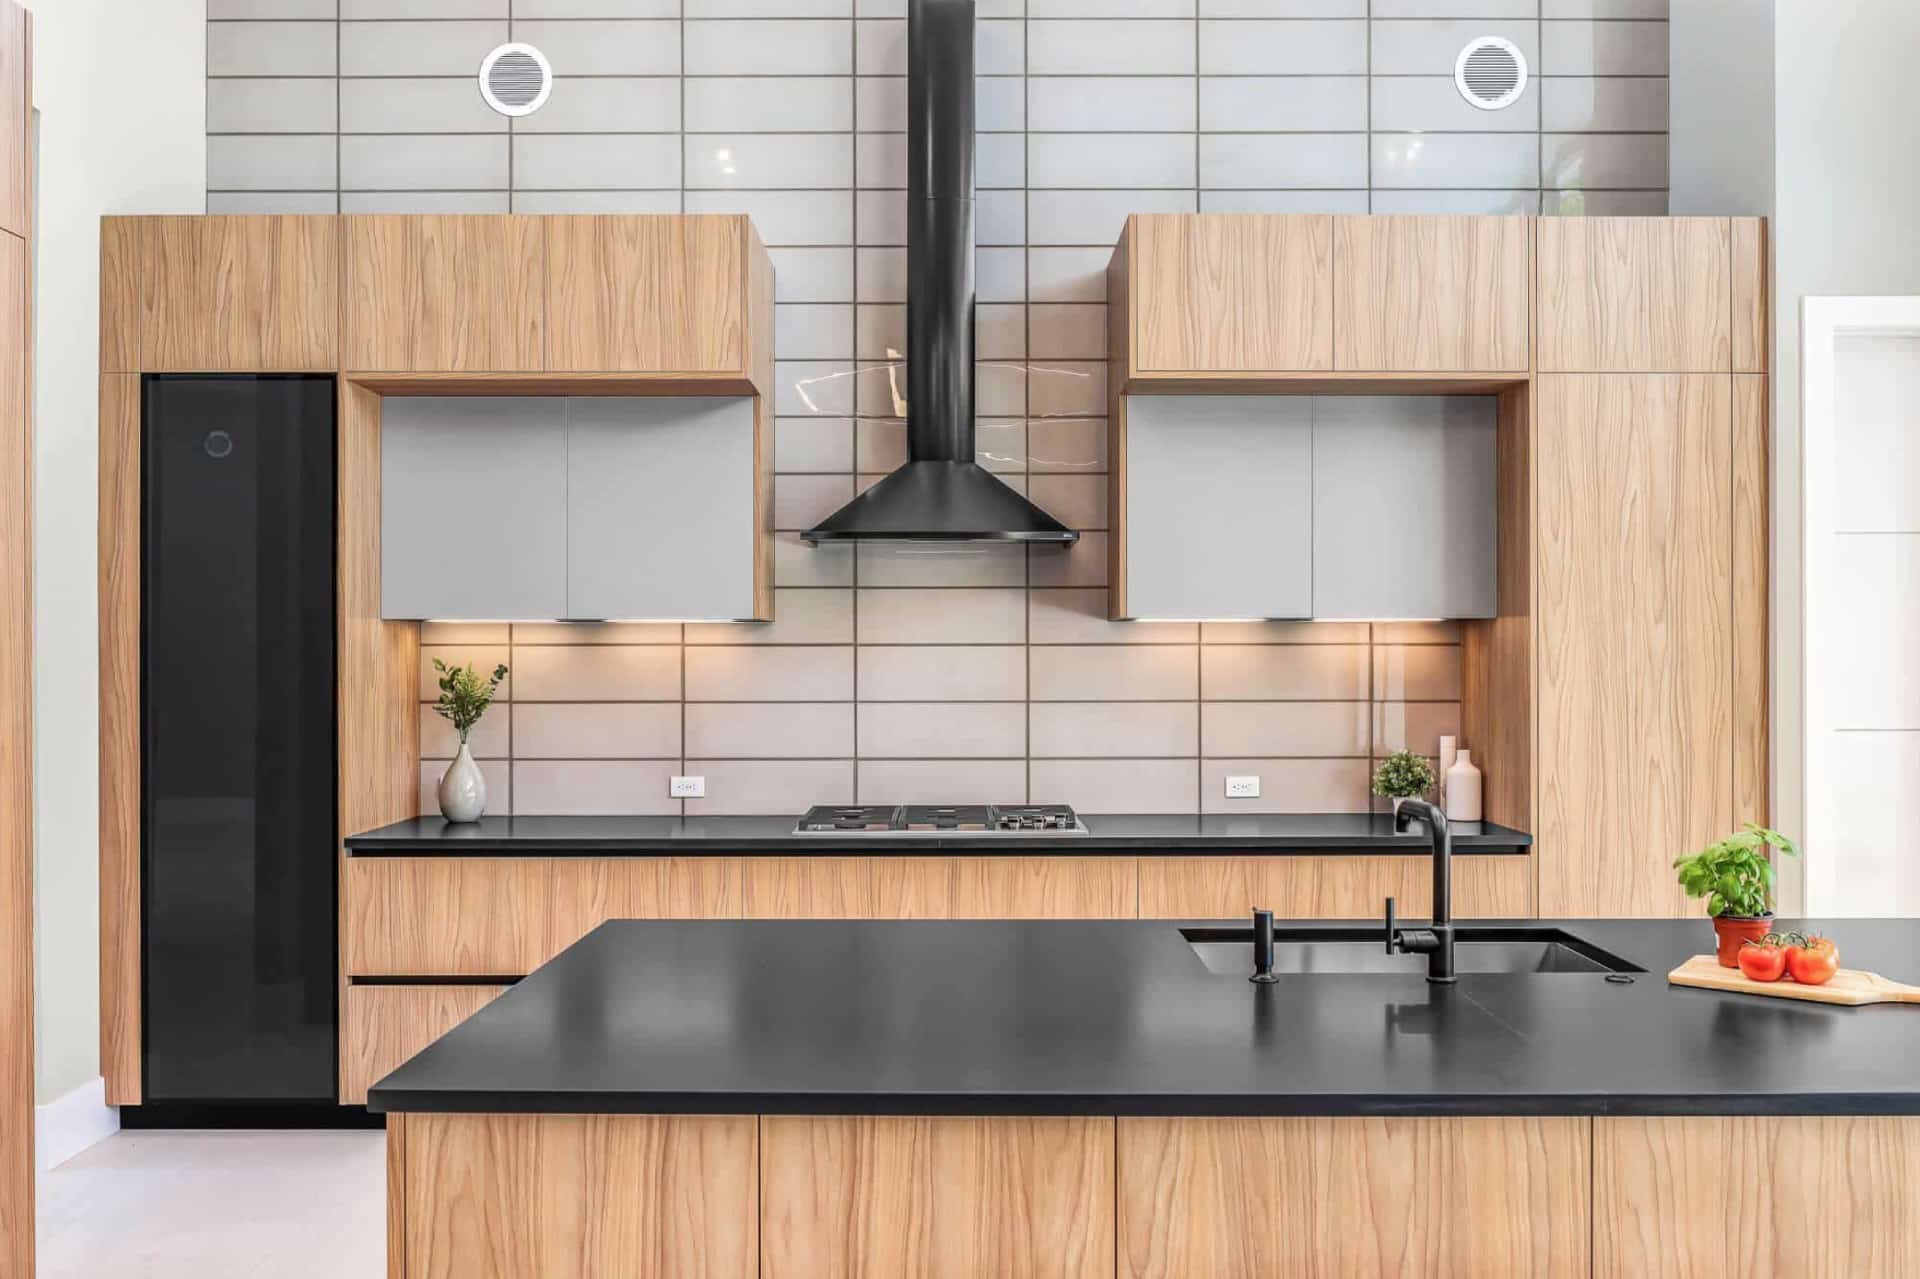 Italian Kitchen Design Ideas to Make 2021 the Year of Your Kitchen Remodel